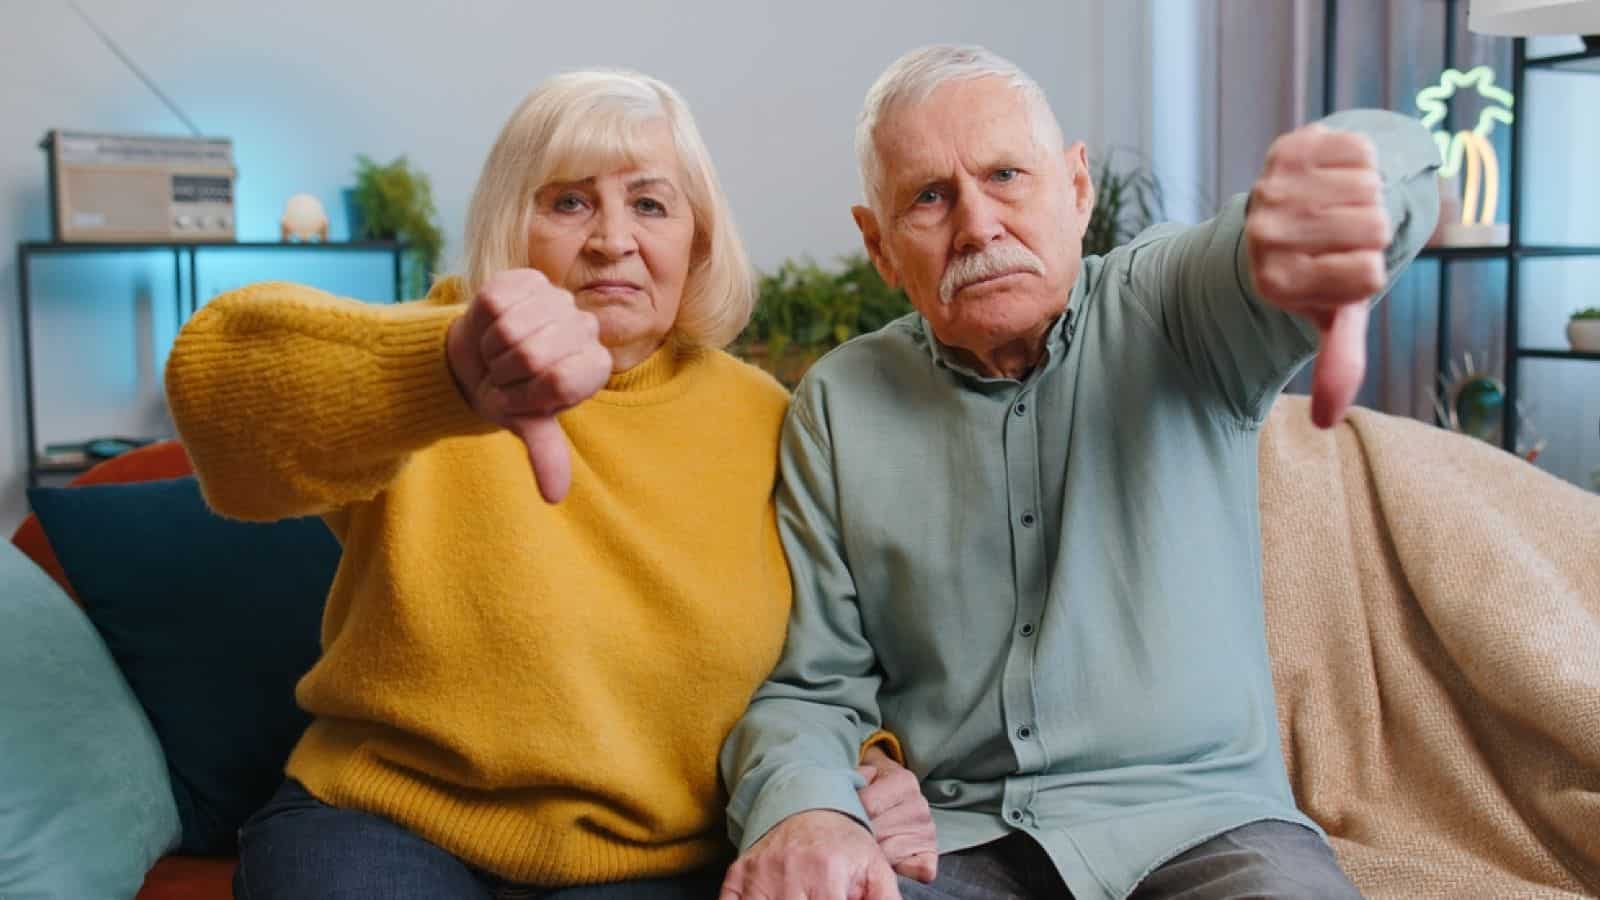 <p>Over the past few decades, society has evolved, and with it, so have a few things that older generations find it uncomfortable to get the hang of. While younger generations are easily able to adapt to these changes, some of which are drastic, others may be struggling slightly. Here are 18 things the elderly may have difficulty learning.</p><p><strong><a href="https://www.lovedbycurls.com/cf/18-things-old-people-just-cant-get-on-board-with-today/">18 Things Old People Just Can’t Get On Board with Today</a></strong></p>